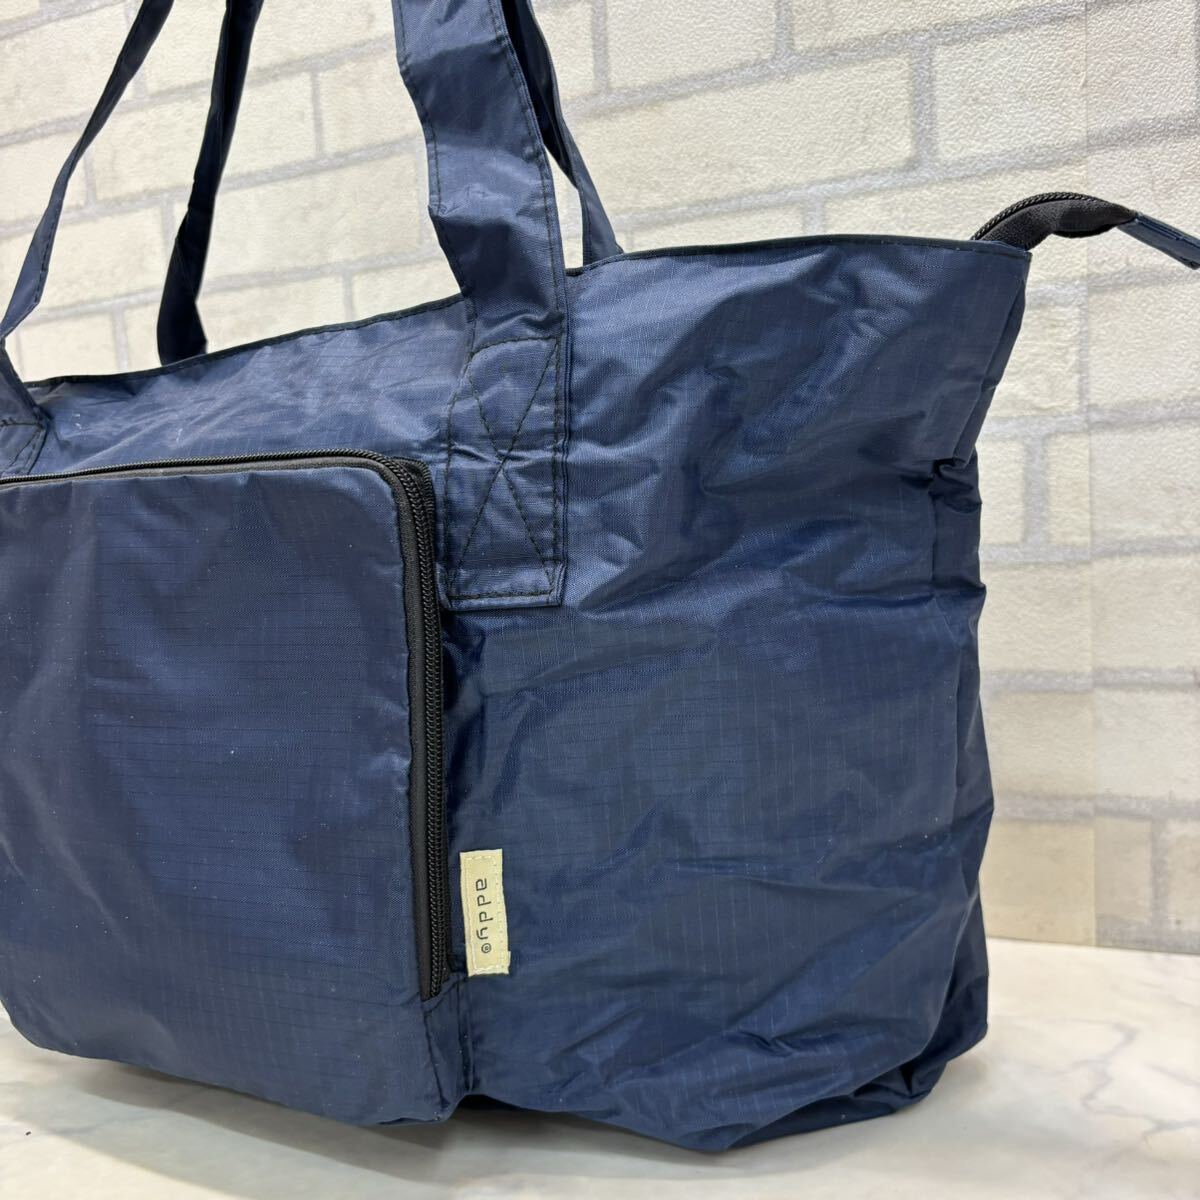  tag equipped addy tote bag hand Boston eko-bag polyester 100% navy folding storage possibility 